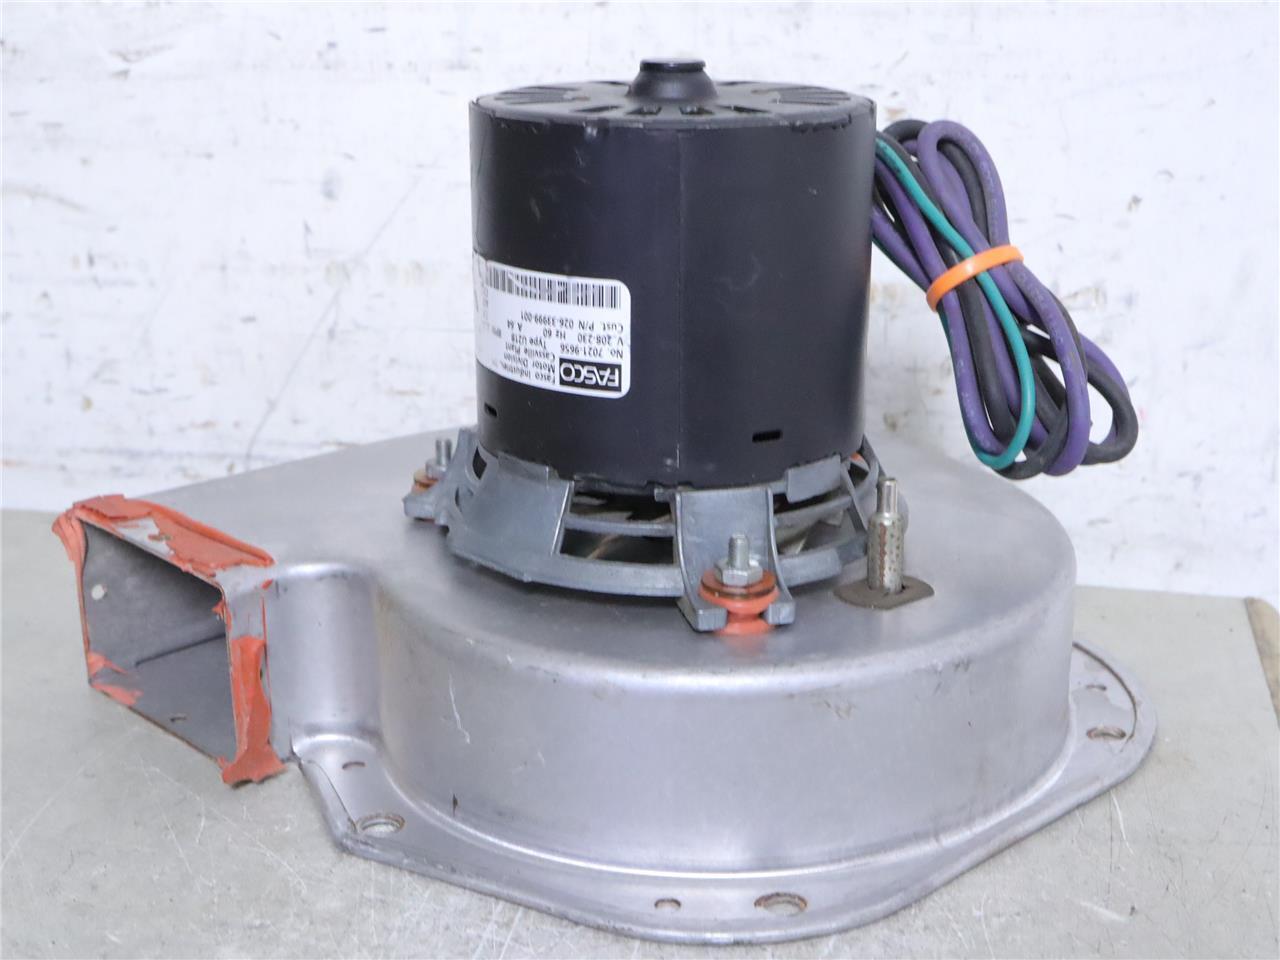 FASCO 7021-9656 Draft Inducer Blower Motor Assembly 026-33999-001